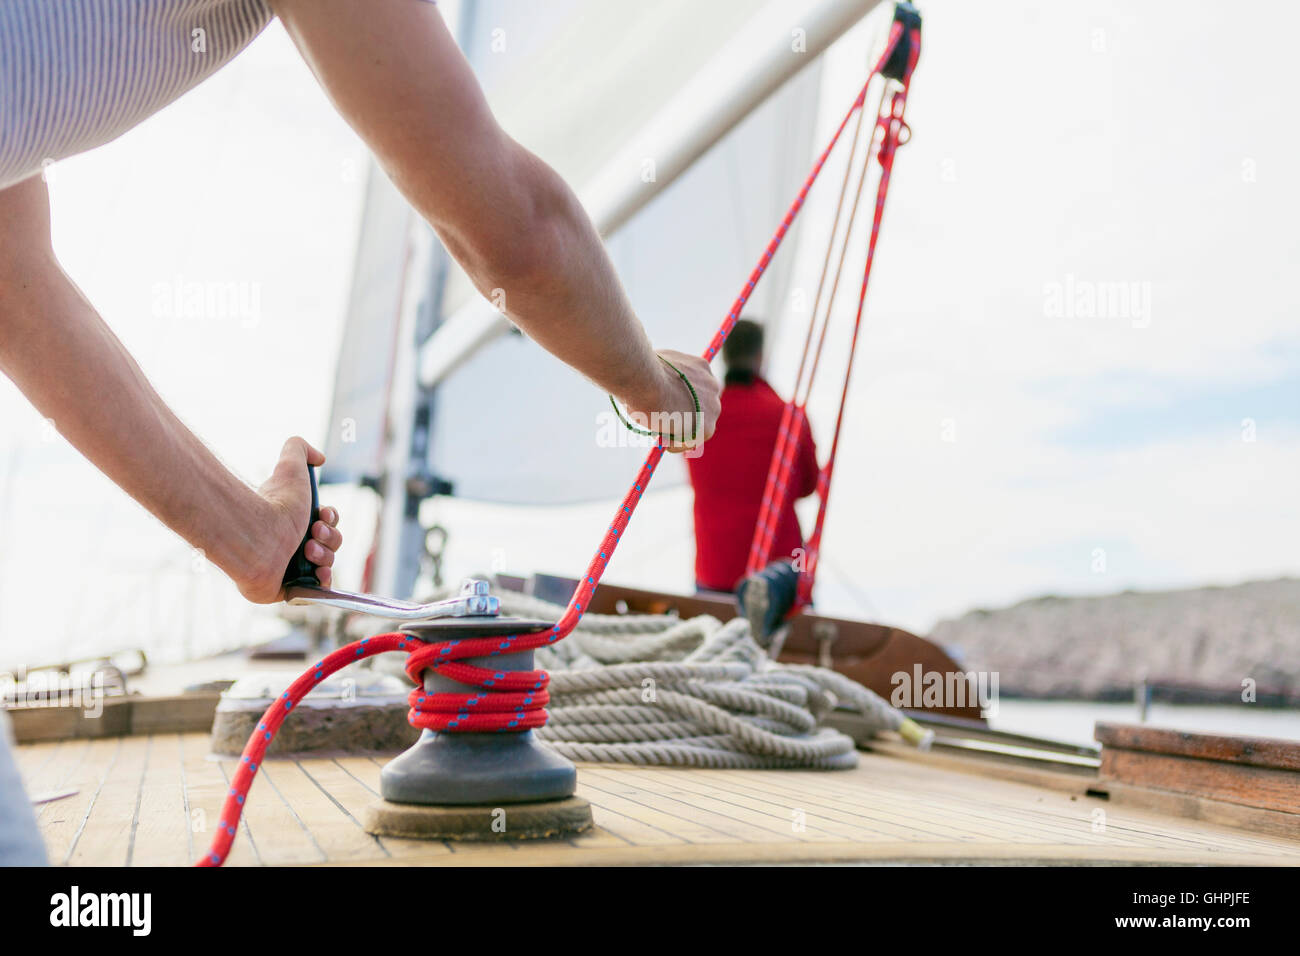 Man winding rope with cable winch on sailboat Stock Photo